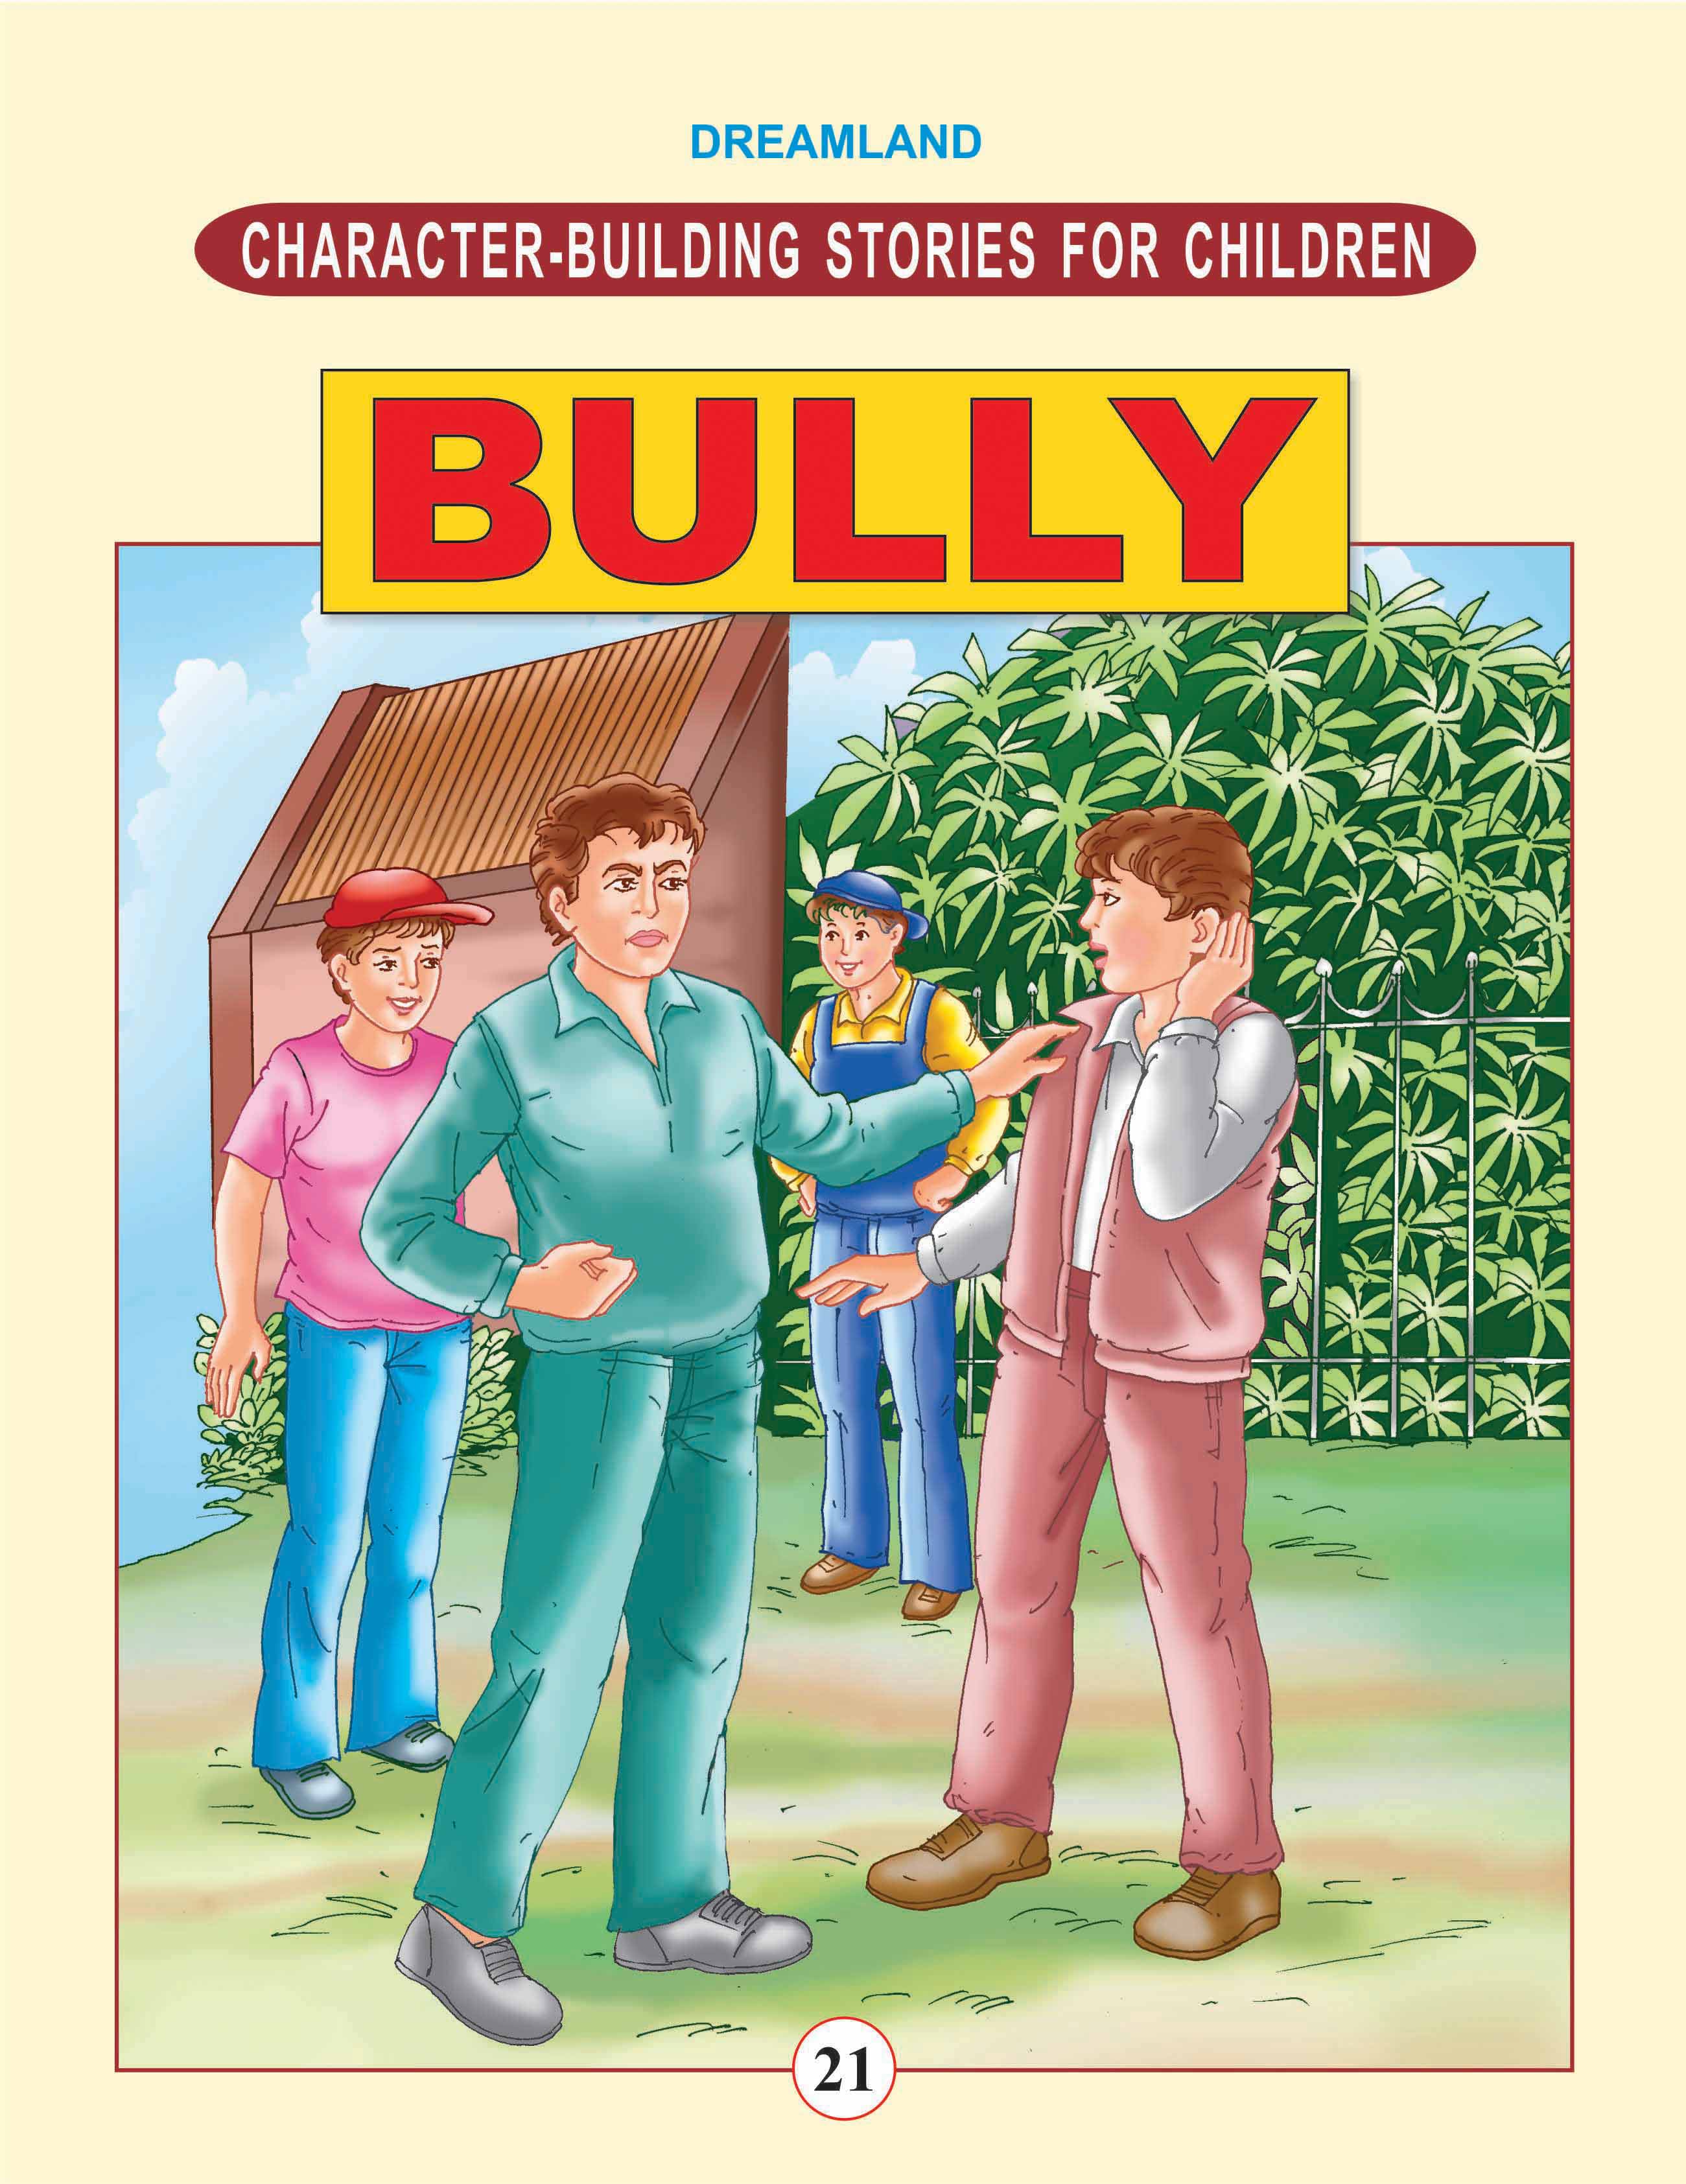 Character-Building -Bully (Character Building Stories for Children)